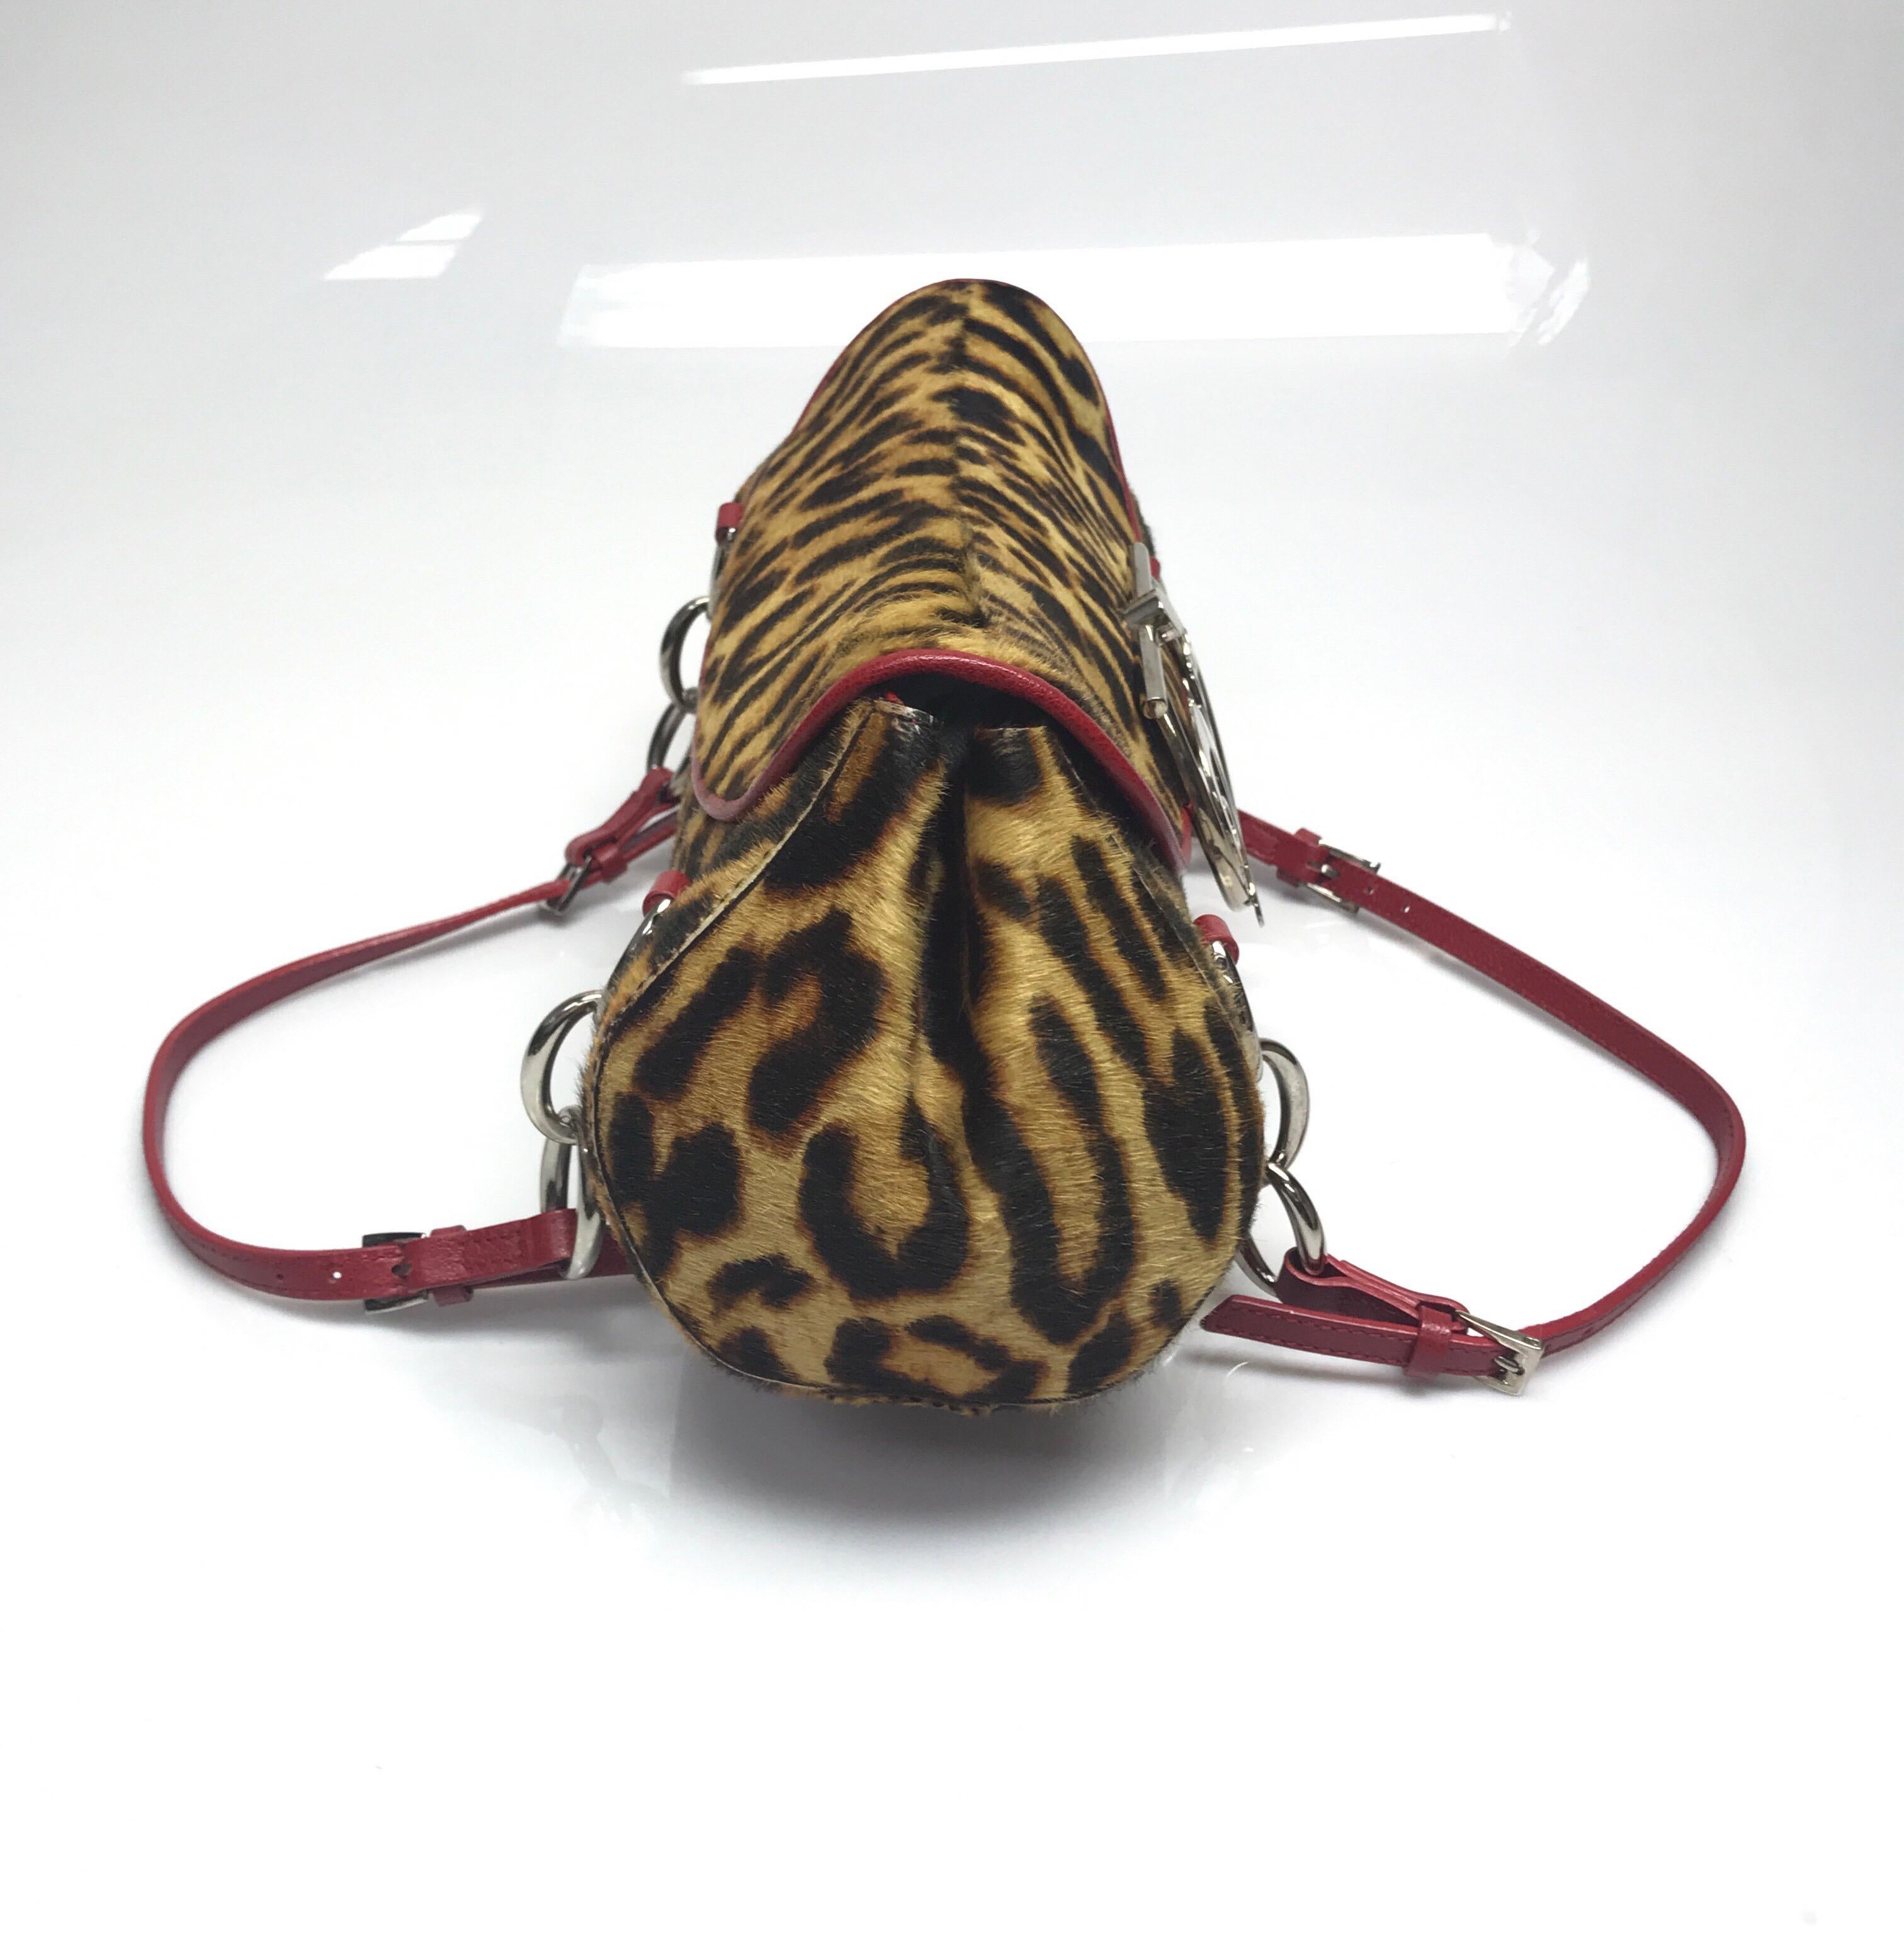 Christian Dior Leopard Print Pony Hair Handbag. This amazing Christian Dior handbag is in excellent condition, there is no sign of use. This handbag is medium sized and made of pony hair with a leopard pattern. There is red leather trim around the